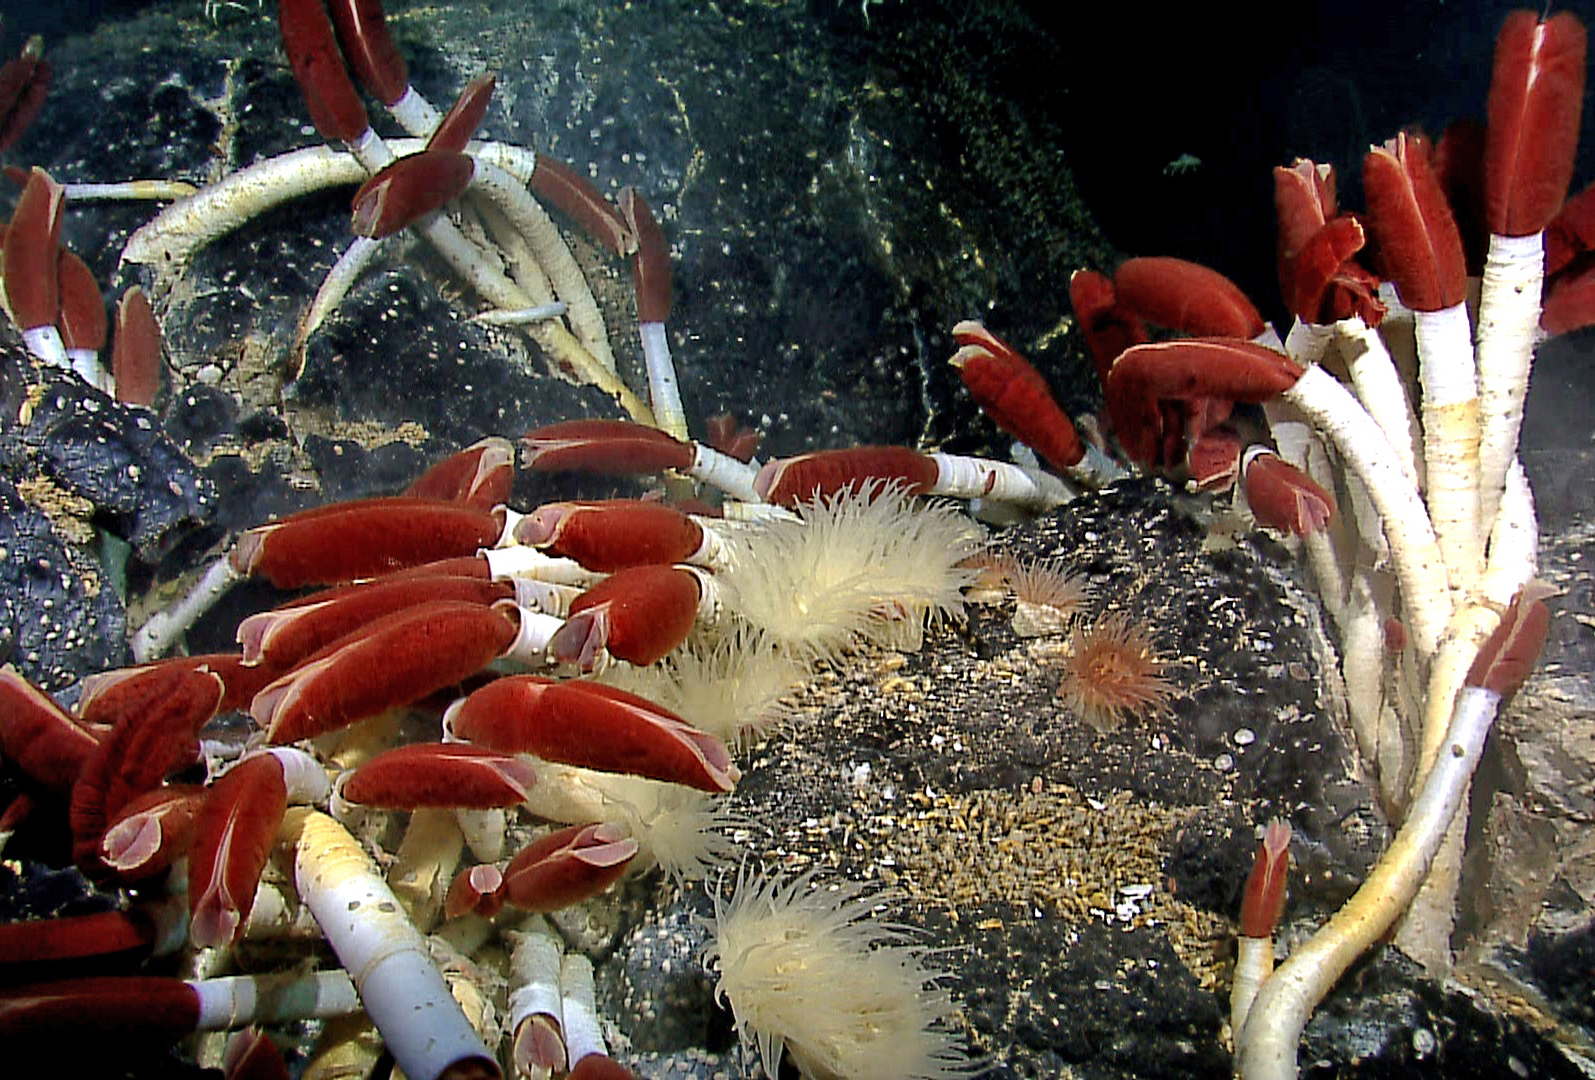 photograph of tube worms with white bodies and red tips